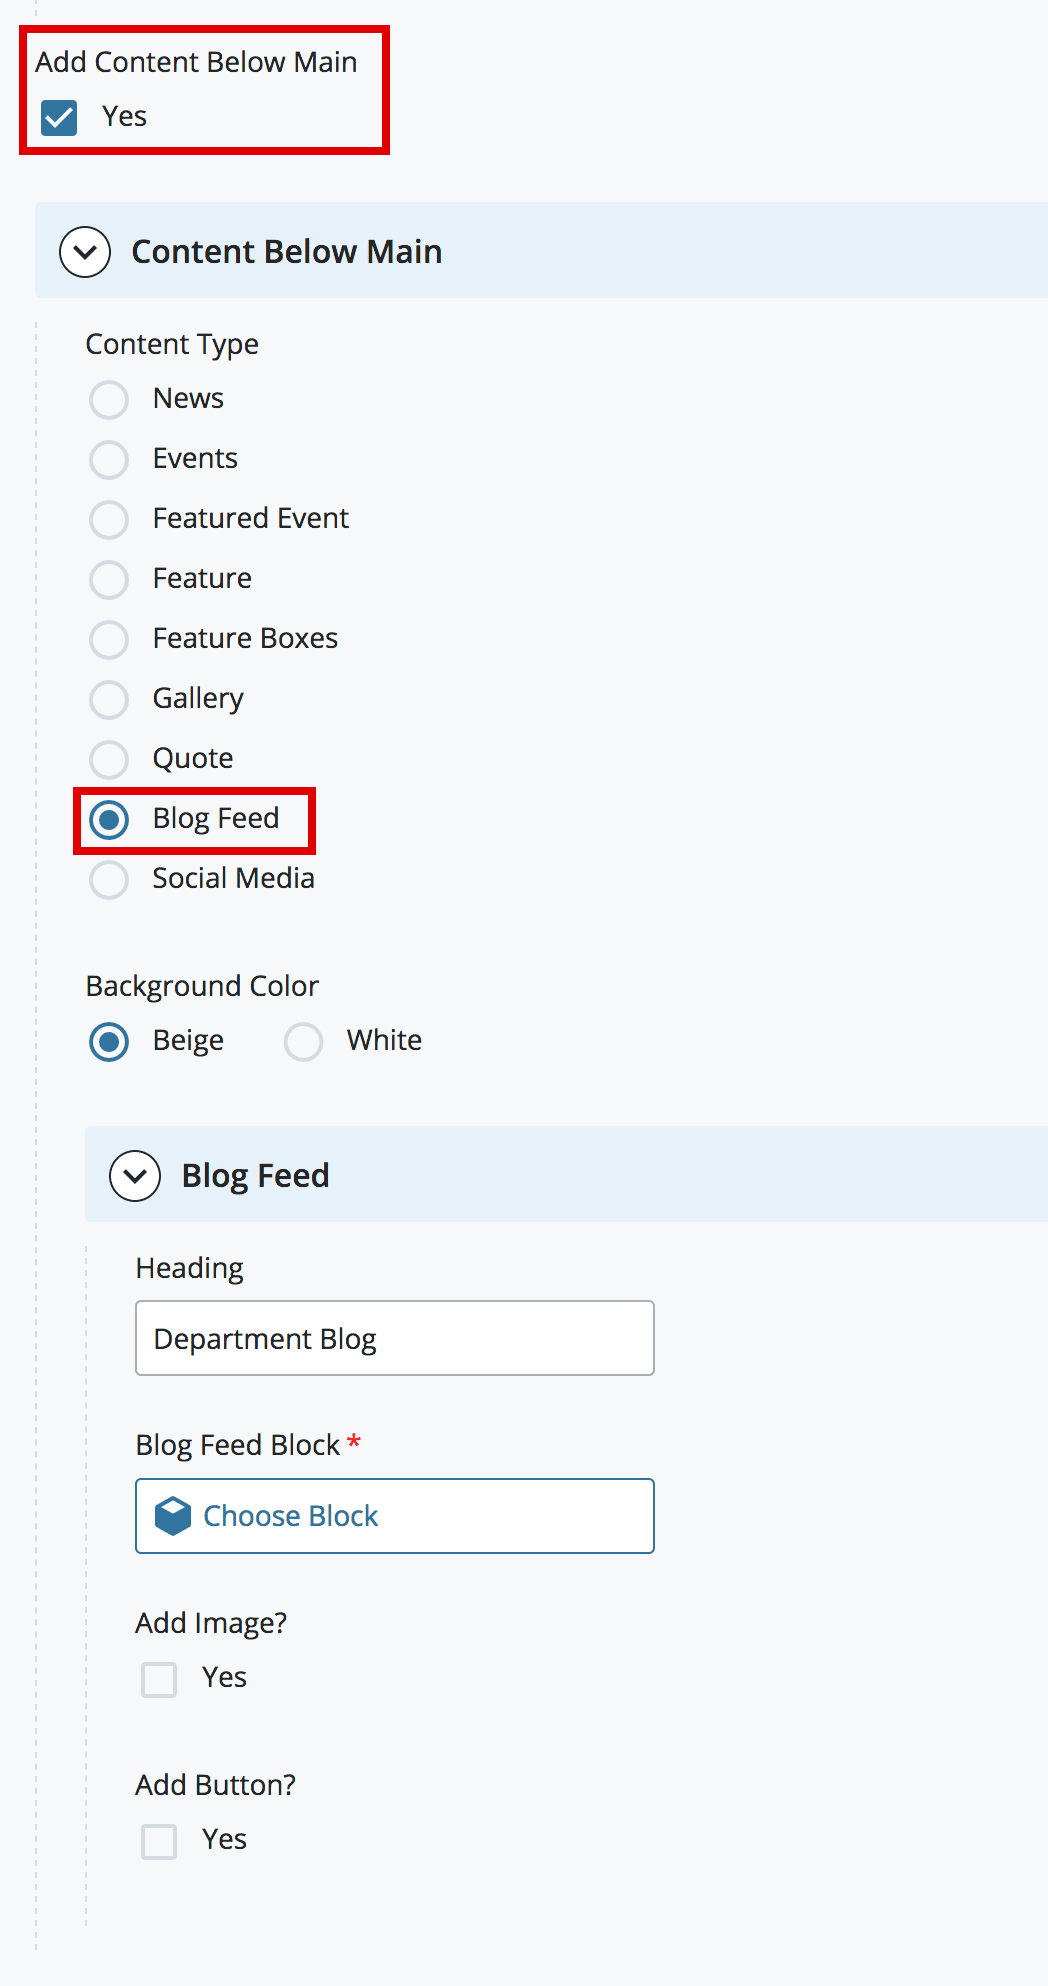 Fields for blog feed content type